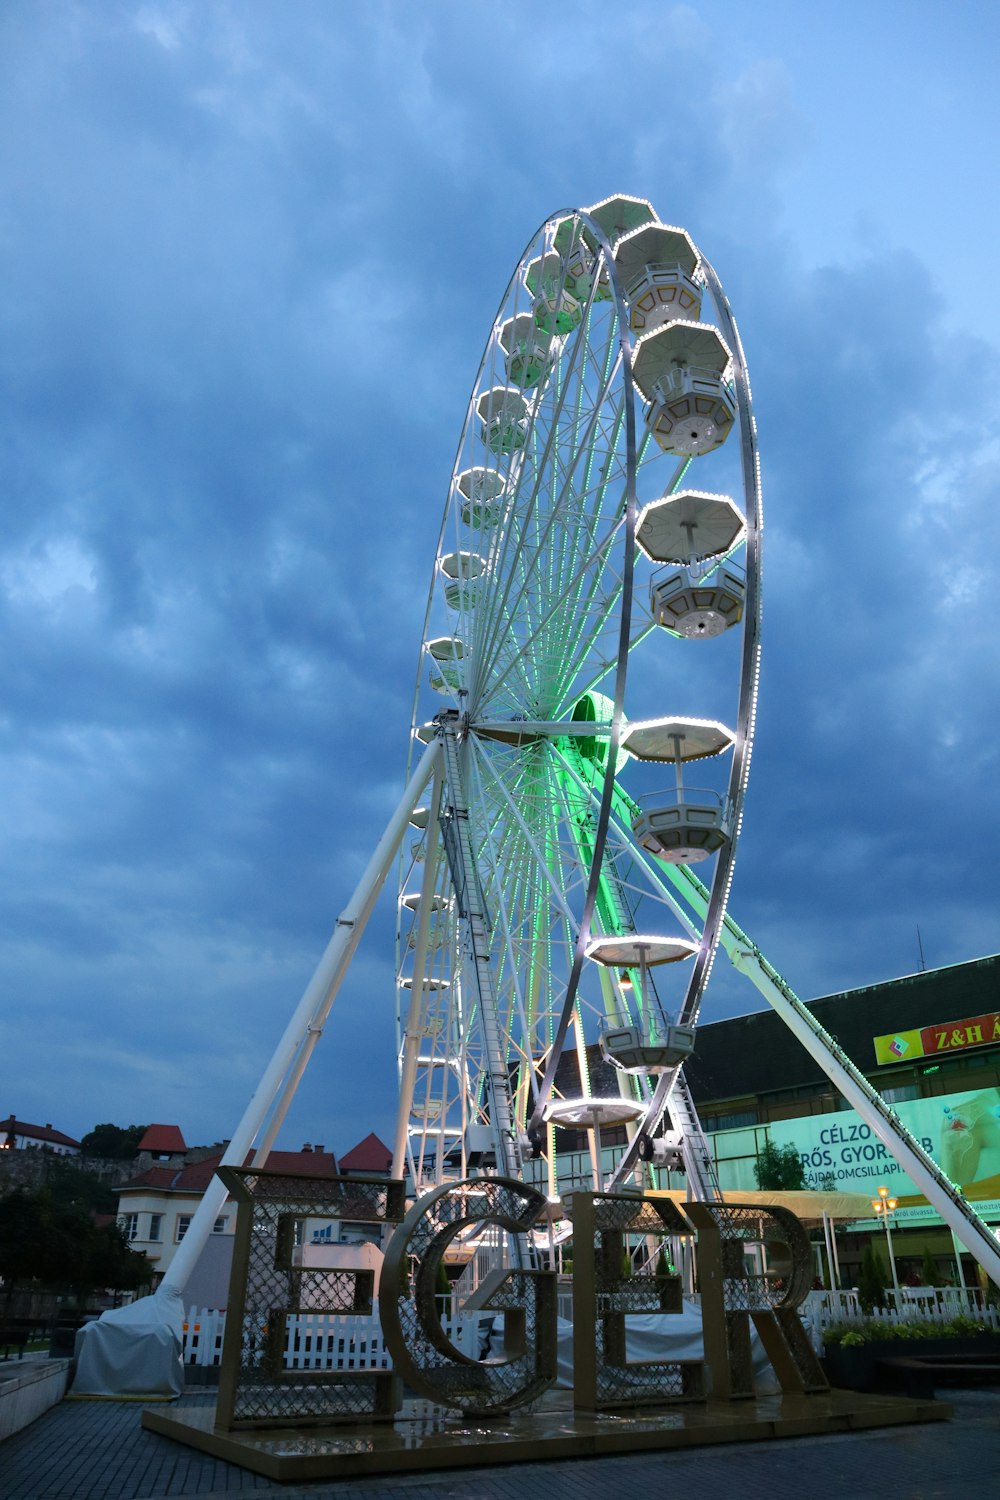 a large ferris wheel sitting on top of a wooden platform